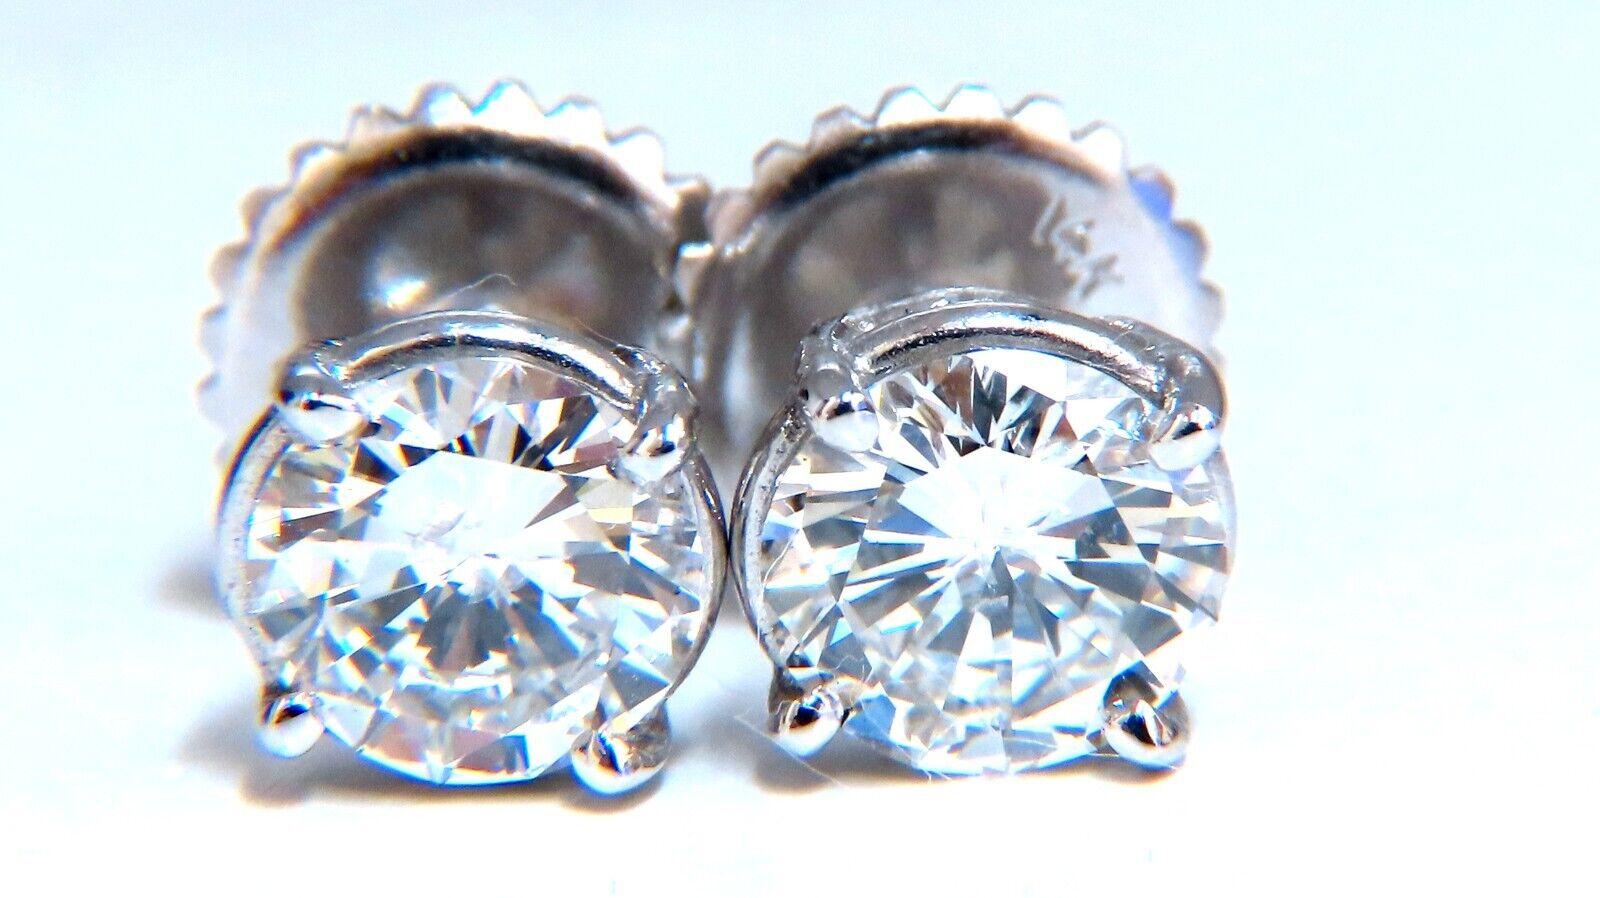 1.01 & 1.06cts of natural round diamonds stud earrings.

GIA Report ID's:

6224158404

6224158401

Stating: G-H-color & I1 clarity.

Please see the reports for the details.

 Comfortable Push-back closure.

$32,000 Appraisal Certificate to accompany